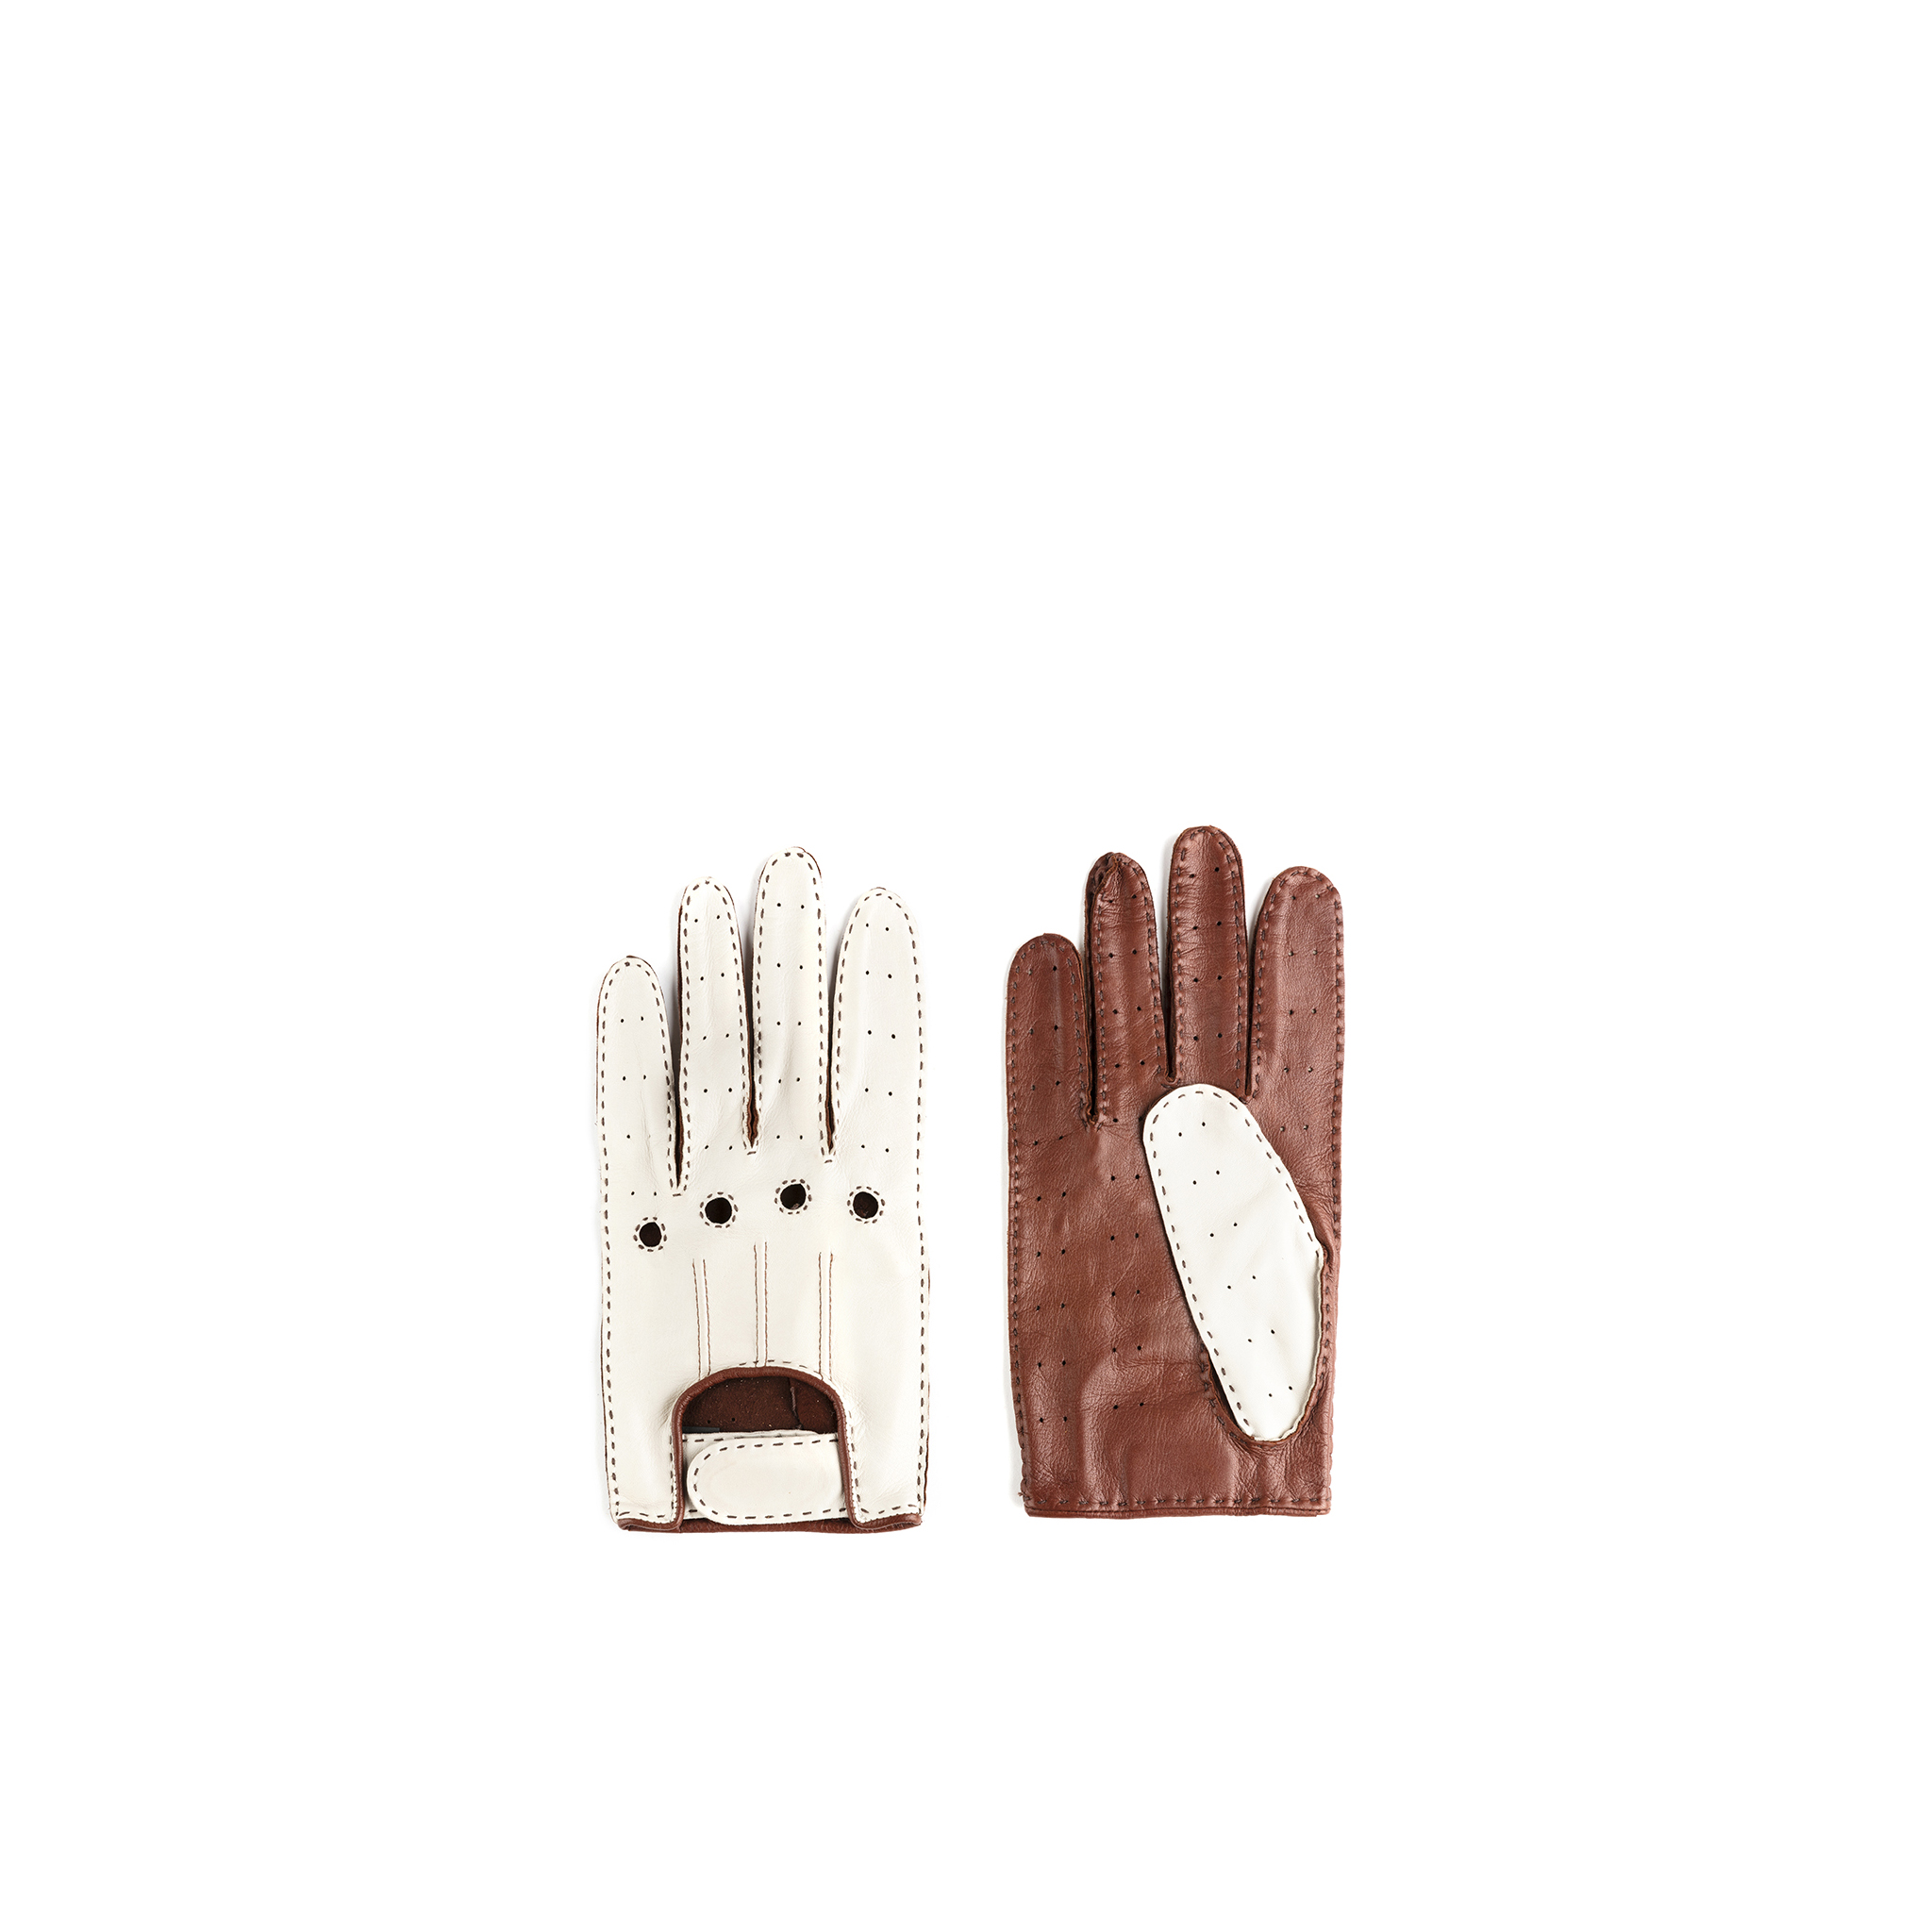 Driver Gloves - Lamb leather - Brown and white colors